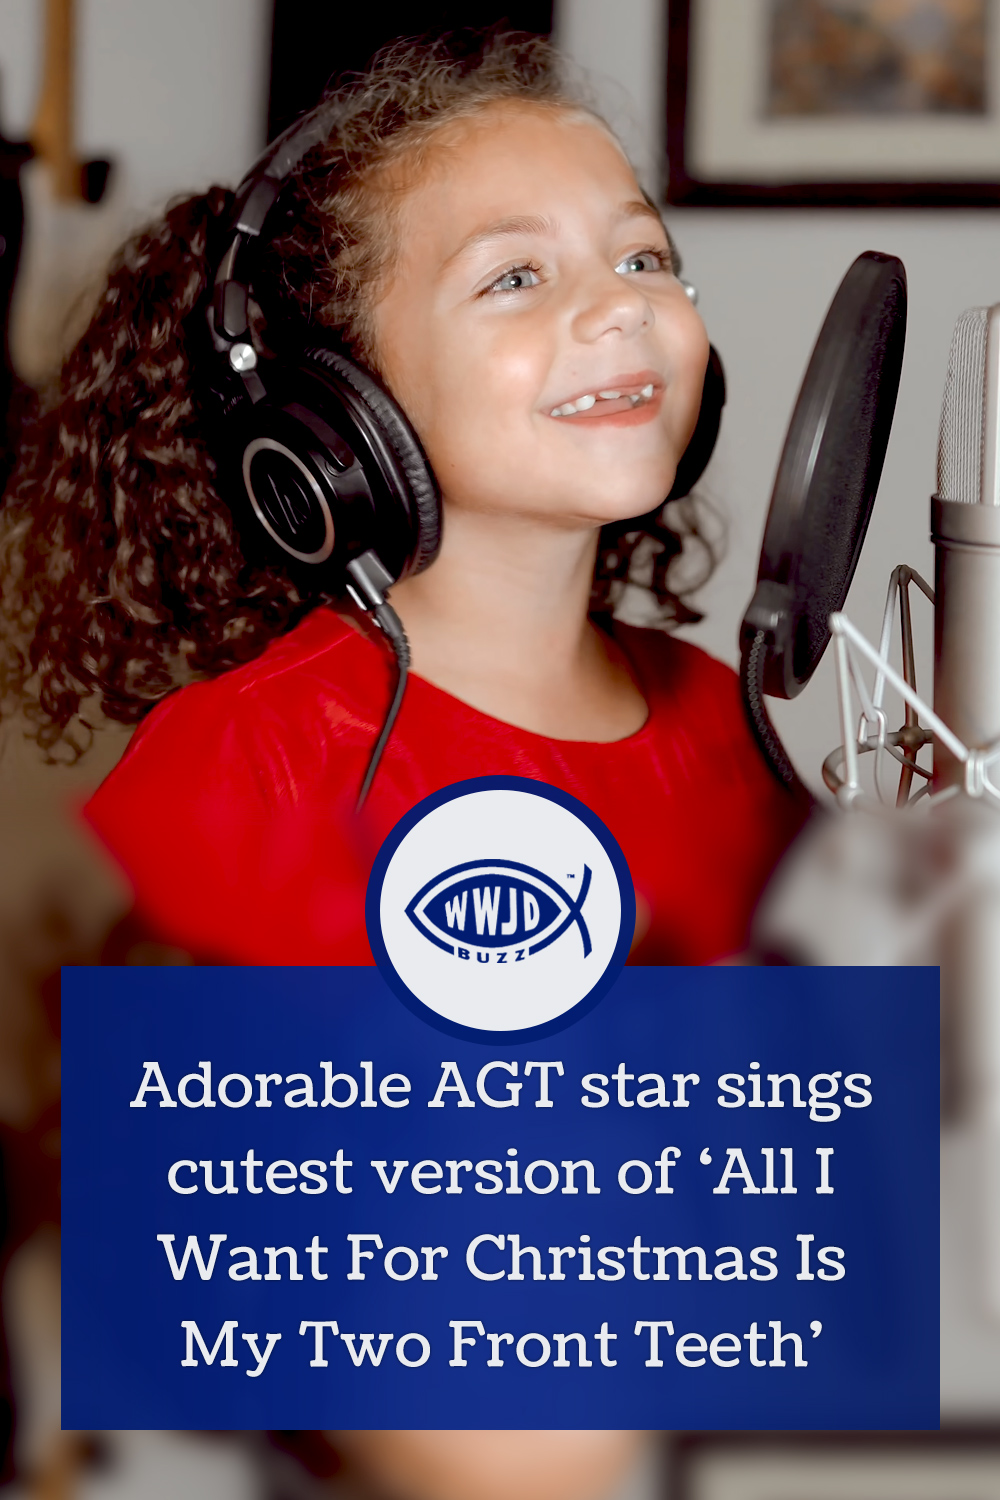 Adorable AGT star sings cutest version of \'All I Want For Christmas Is My Two Front Teeth\'